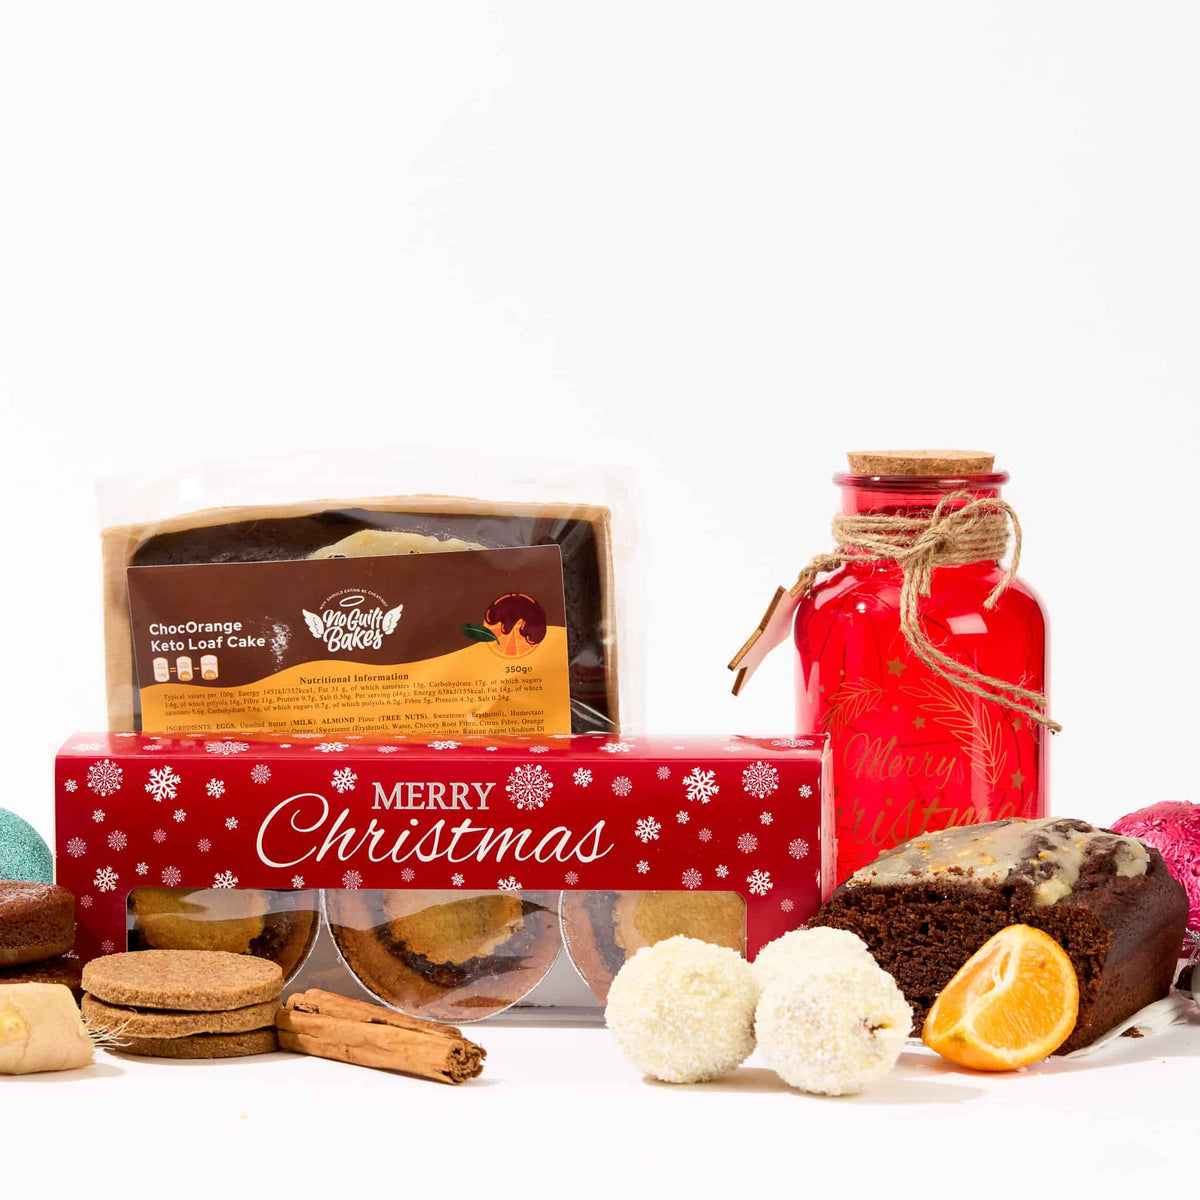 The No Guilt Bakes Christmas Keto Treat Box includes a variety of festive treats such as cookies and a jar.